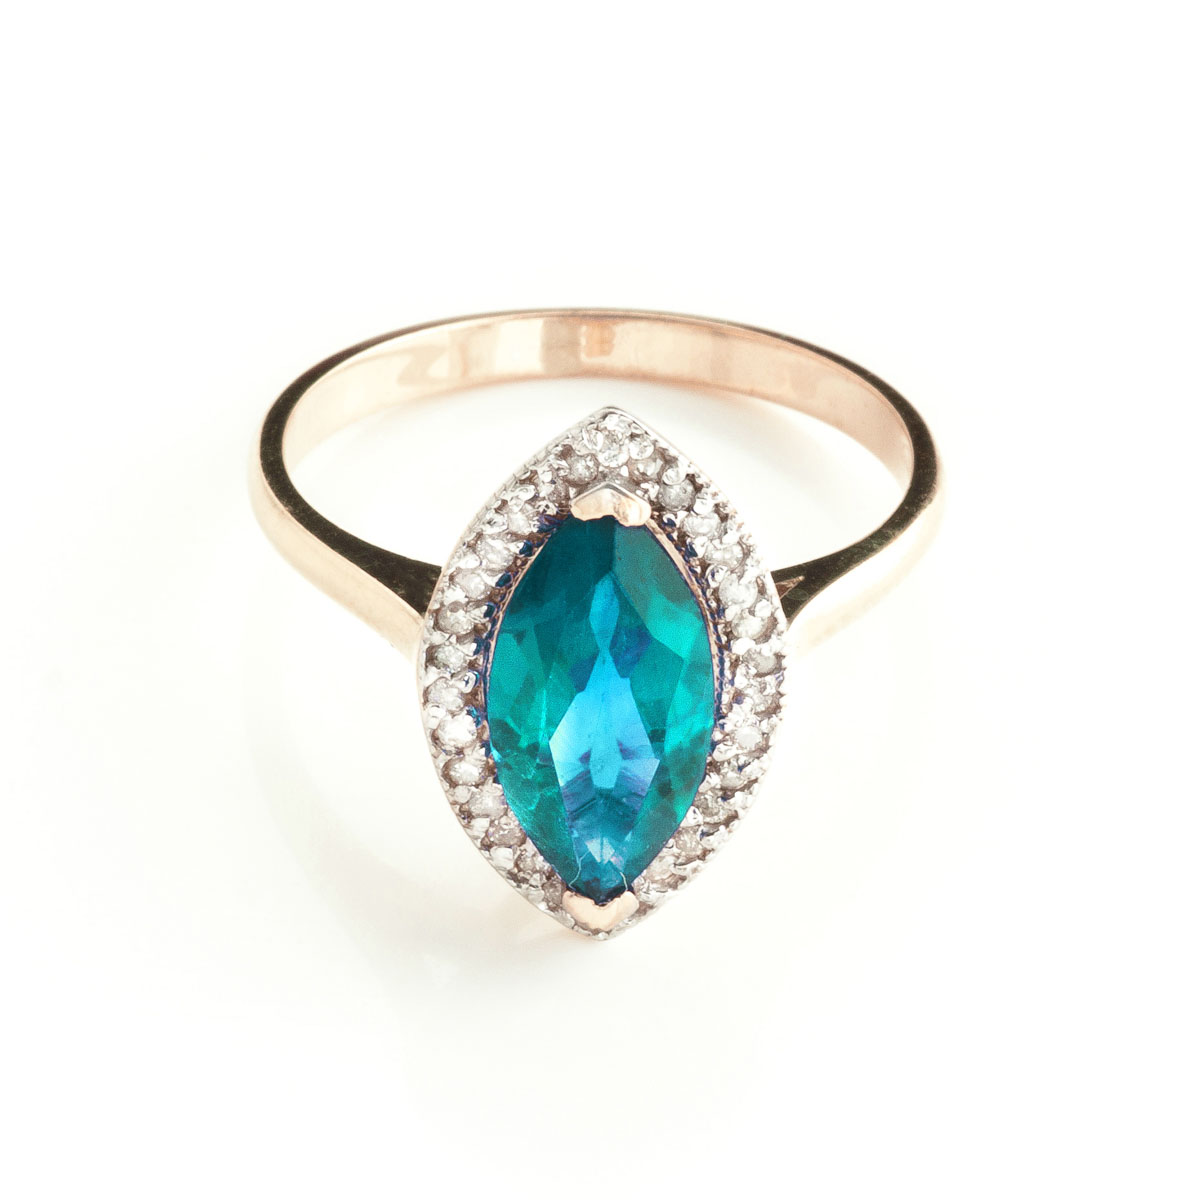 Blue Topaz Halo Ring 2.4 ctw in 9ct Rose Gold